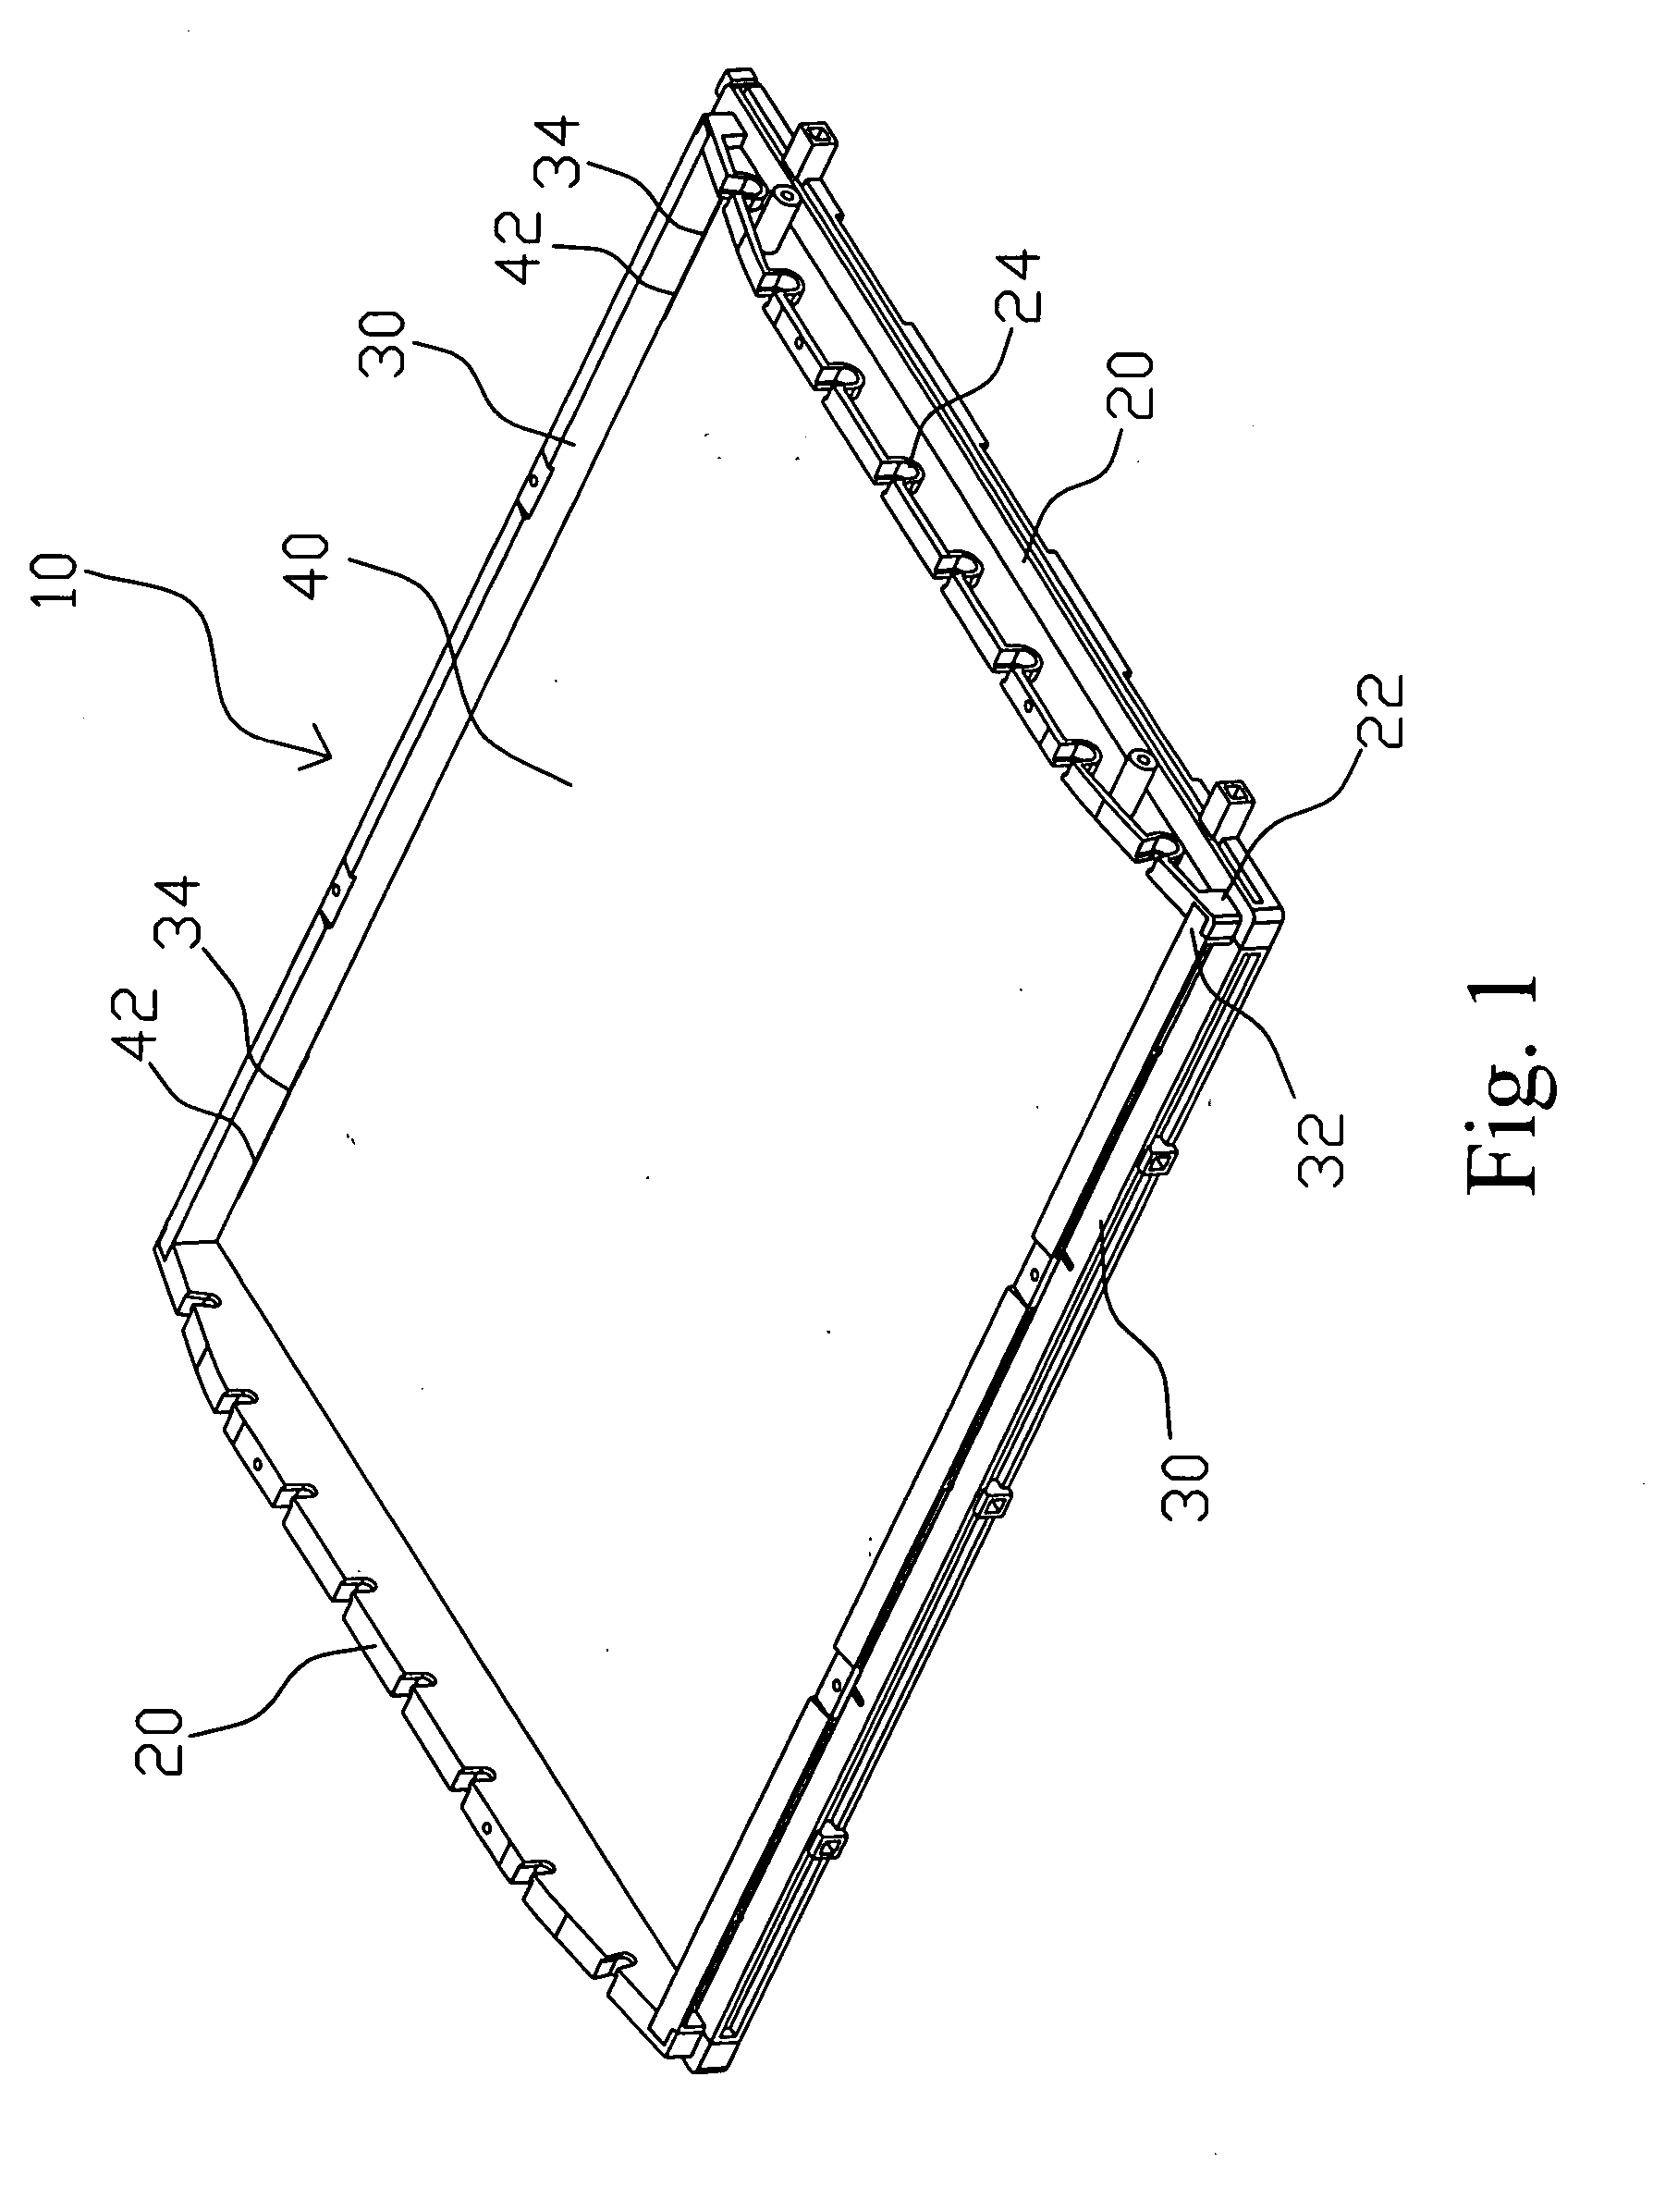 Assembly structure of a back light module